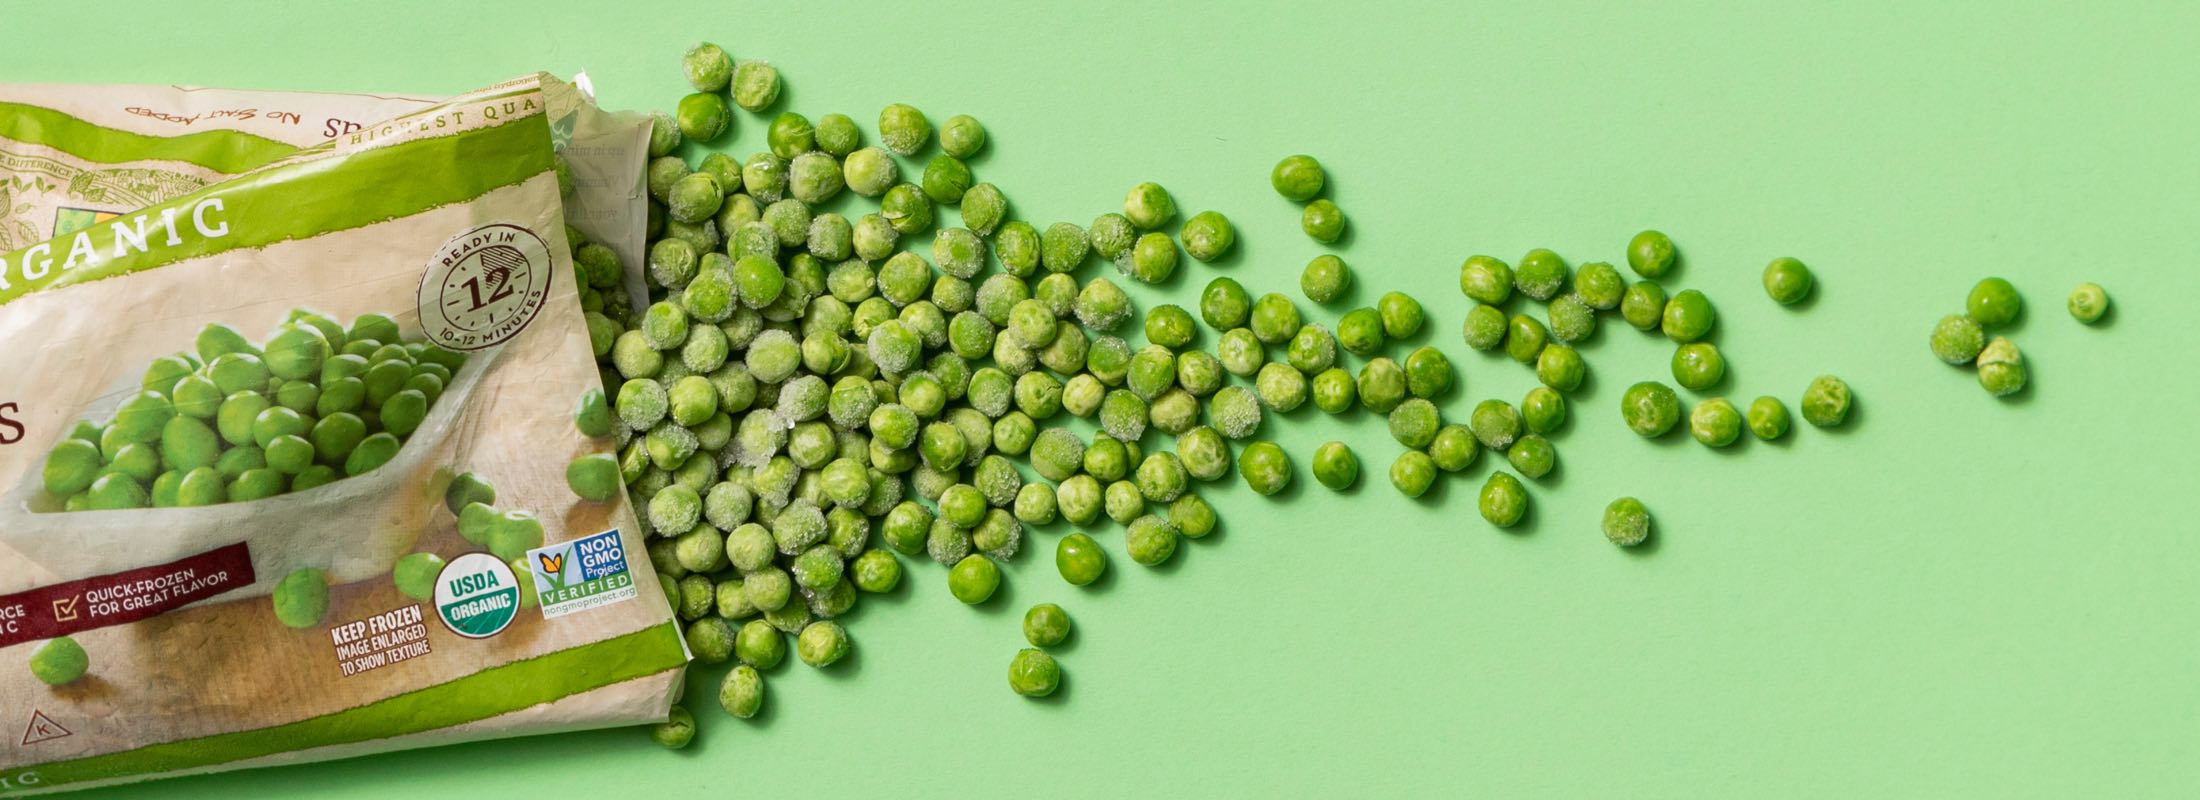 Frozen vegetables like peas are great to have in your freezer.